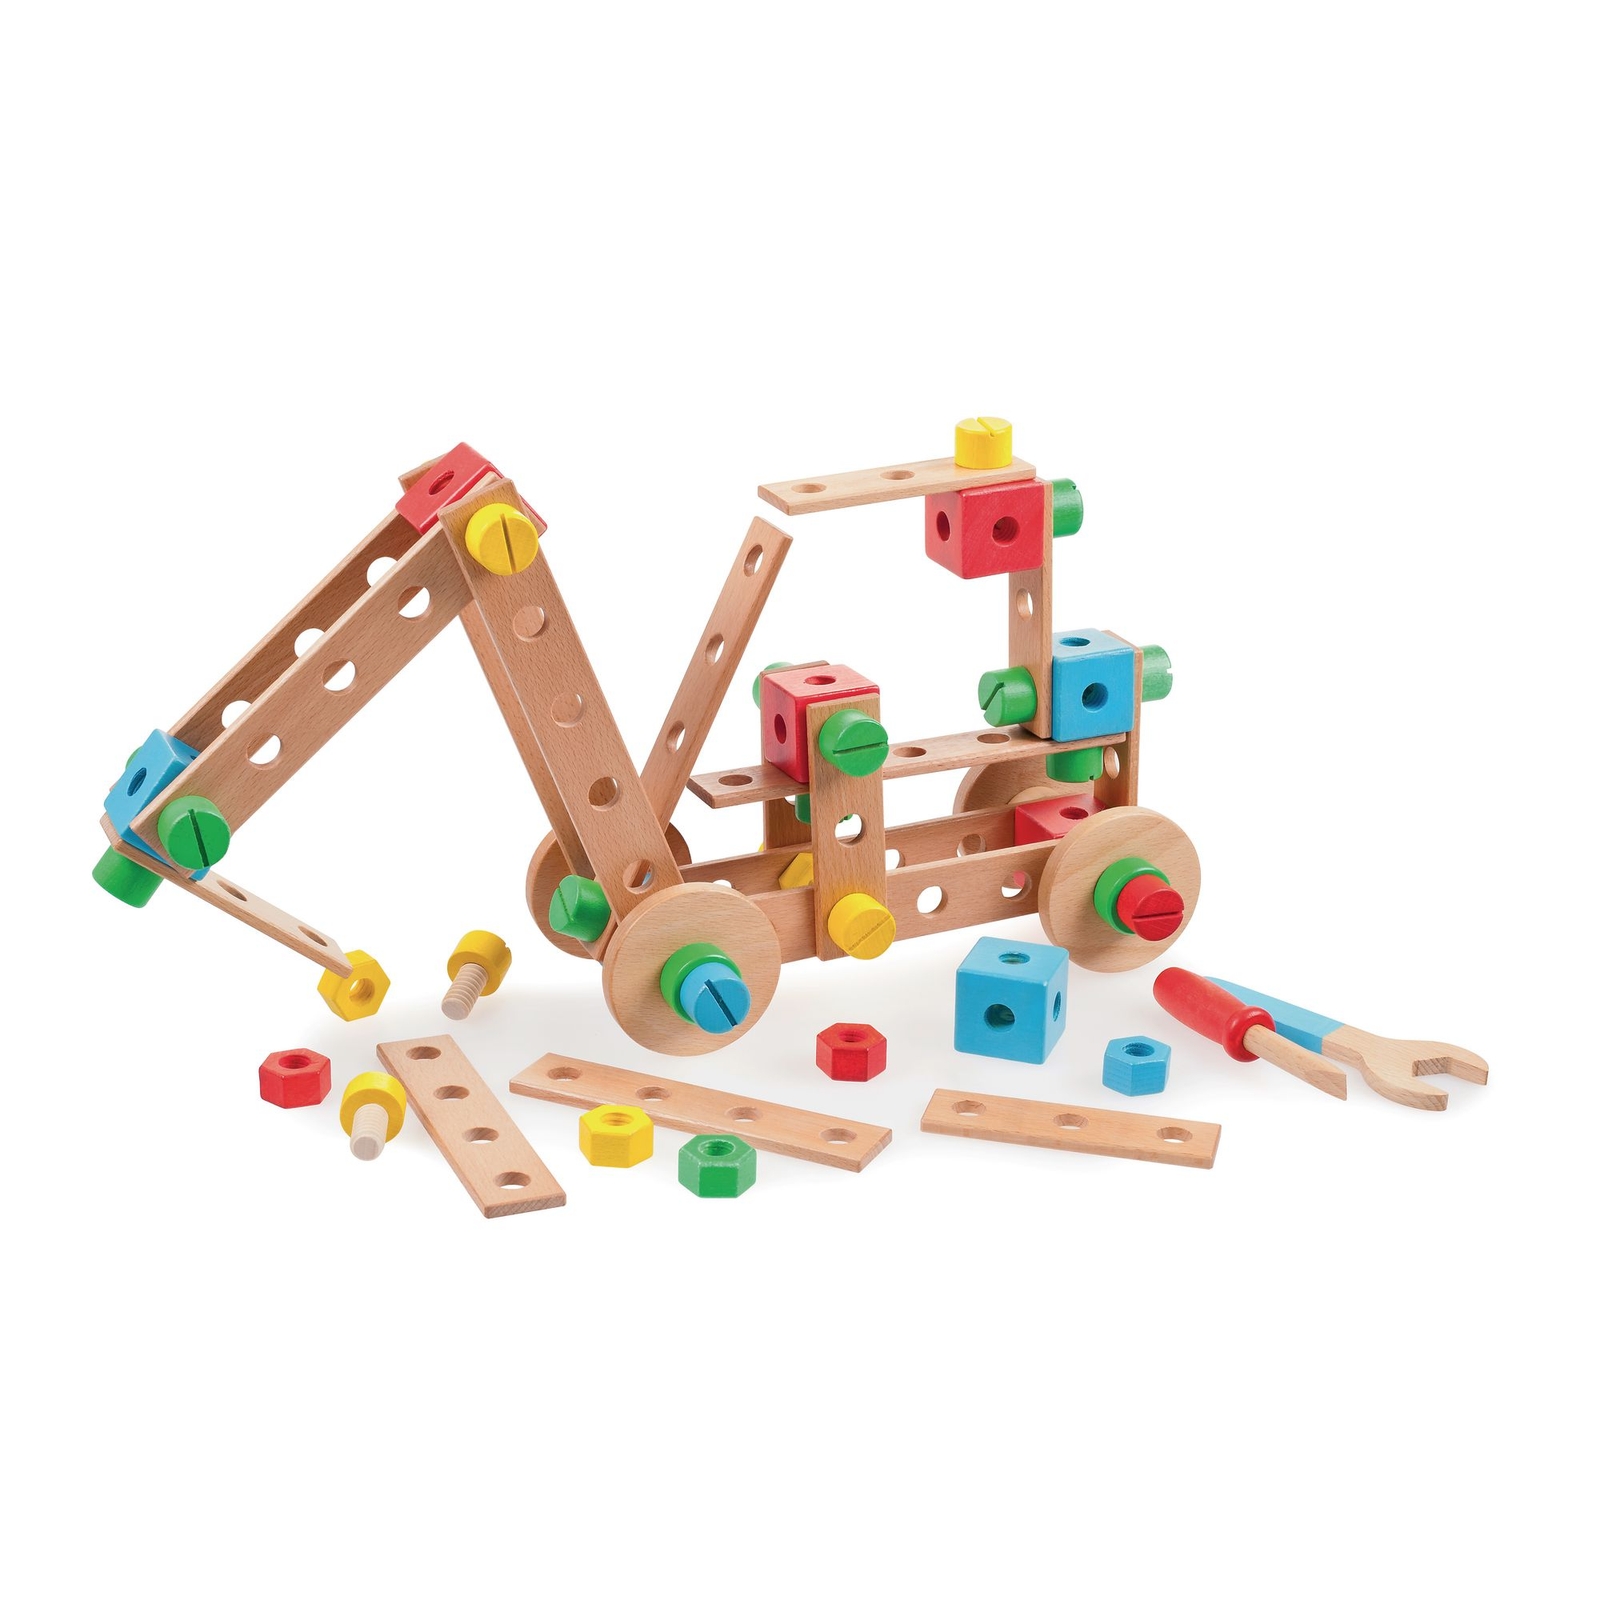 Construction Set - Pack of 91